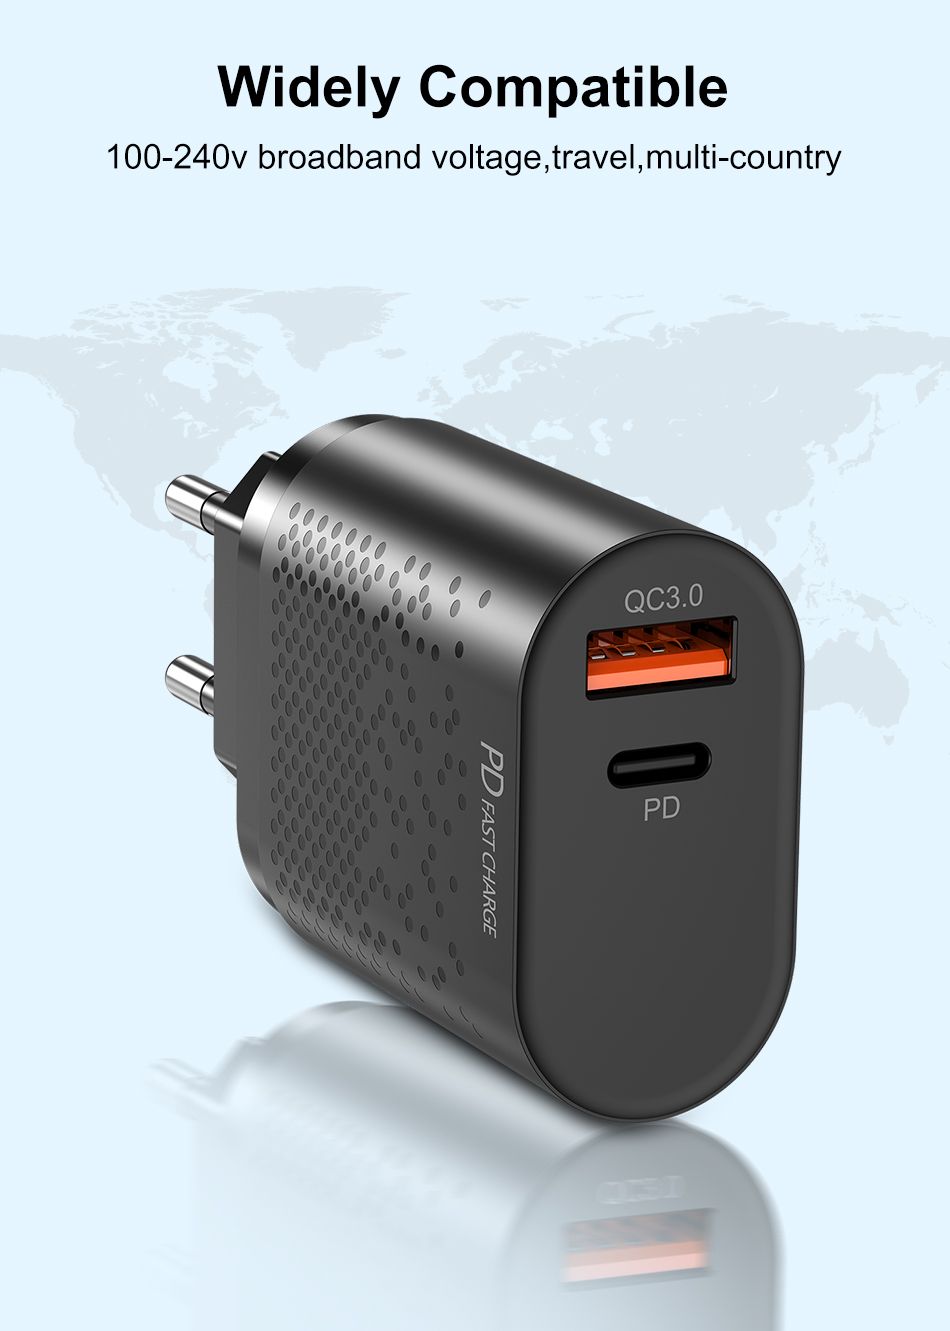 USLION-18W-3A-Quik-Charge-30-PD-Charger-USB-Charger-EUUS-Plug-for-iPhone-12-XS-11Pro-Huawei-P30-Pro--1746901